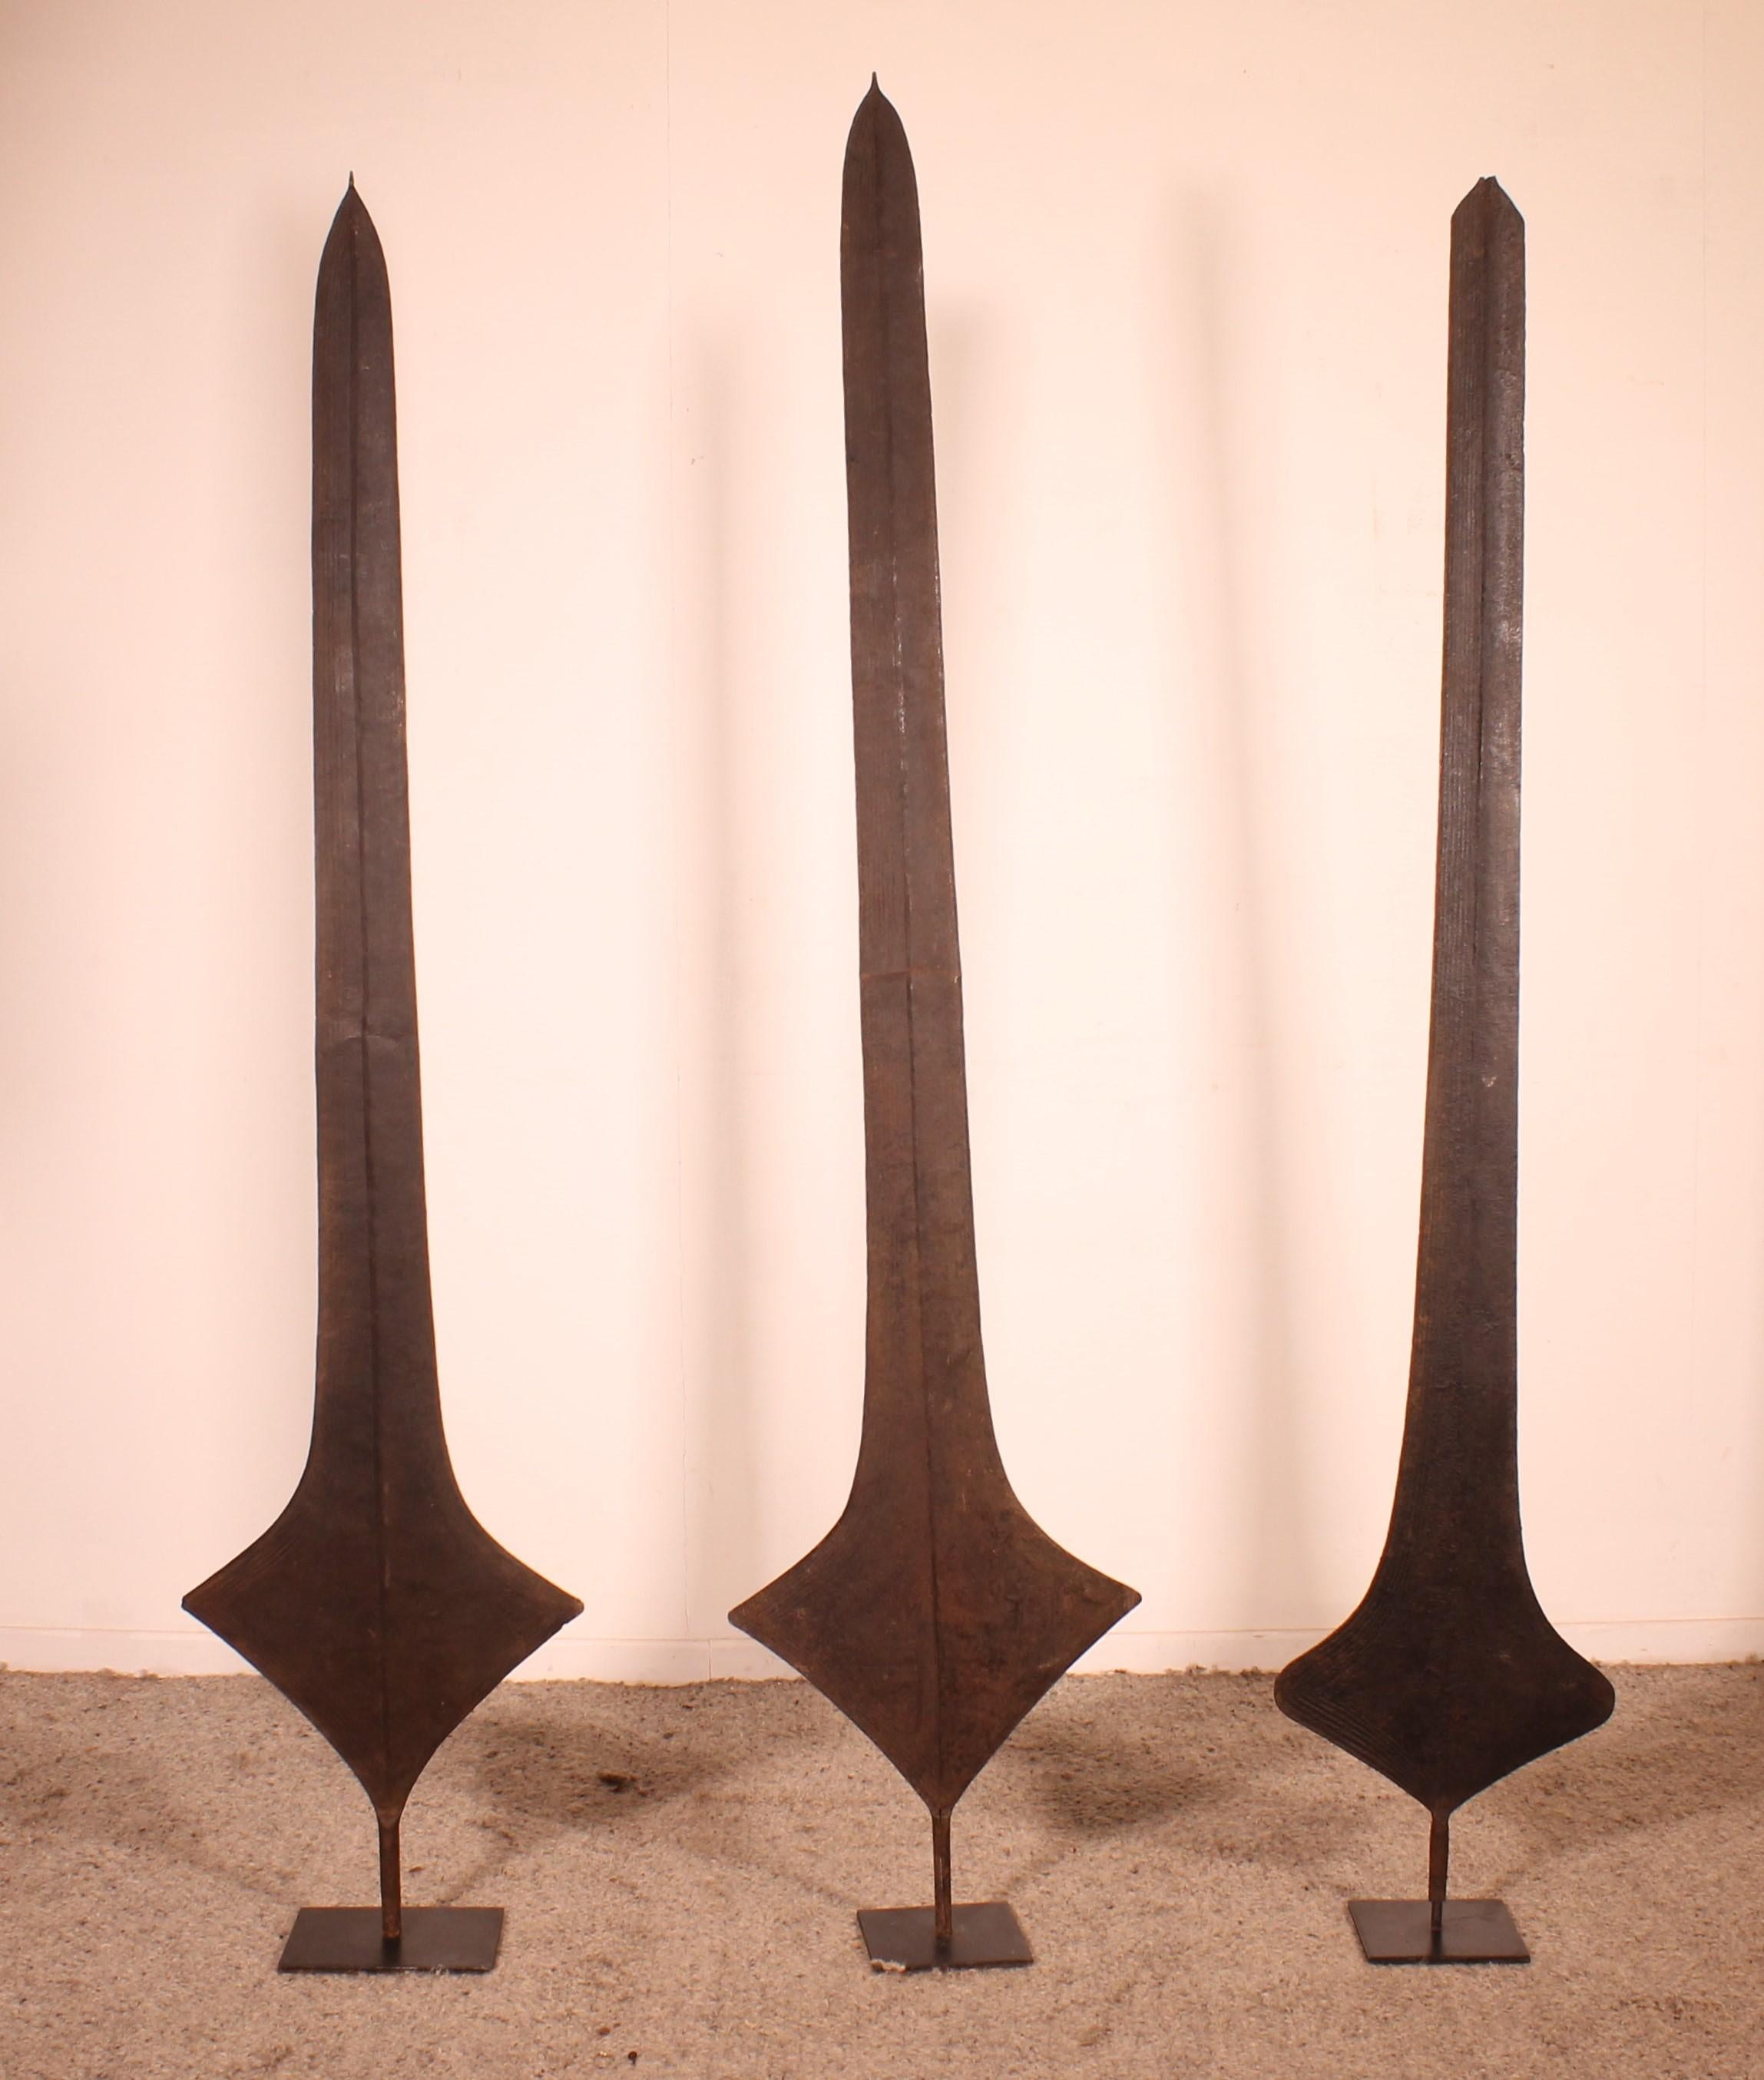 Three African iron currency blades or swords currency from the Topoke peoples from the Democratic Republic of Congo which are nicely presented upon a custom metal stand. Such blades were used by various tribal groups in the Democratic Republic of